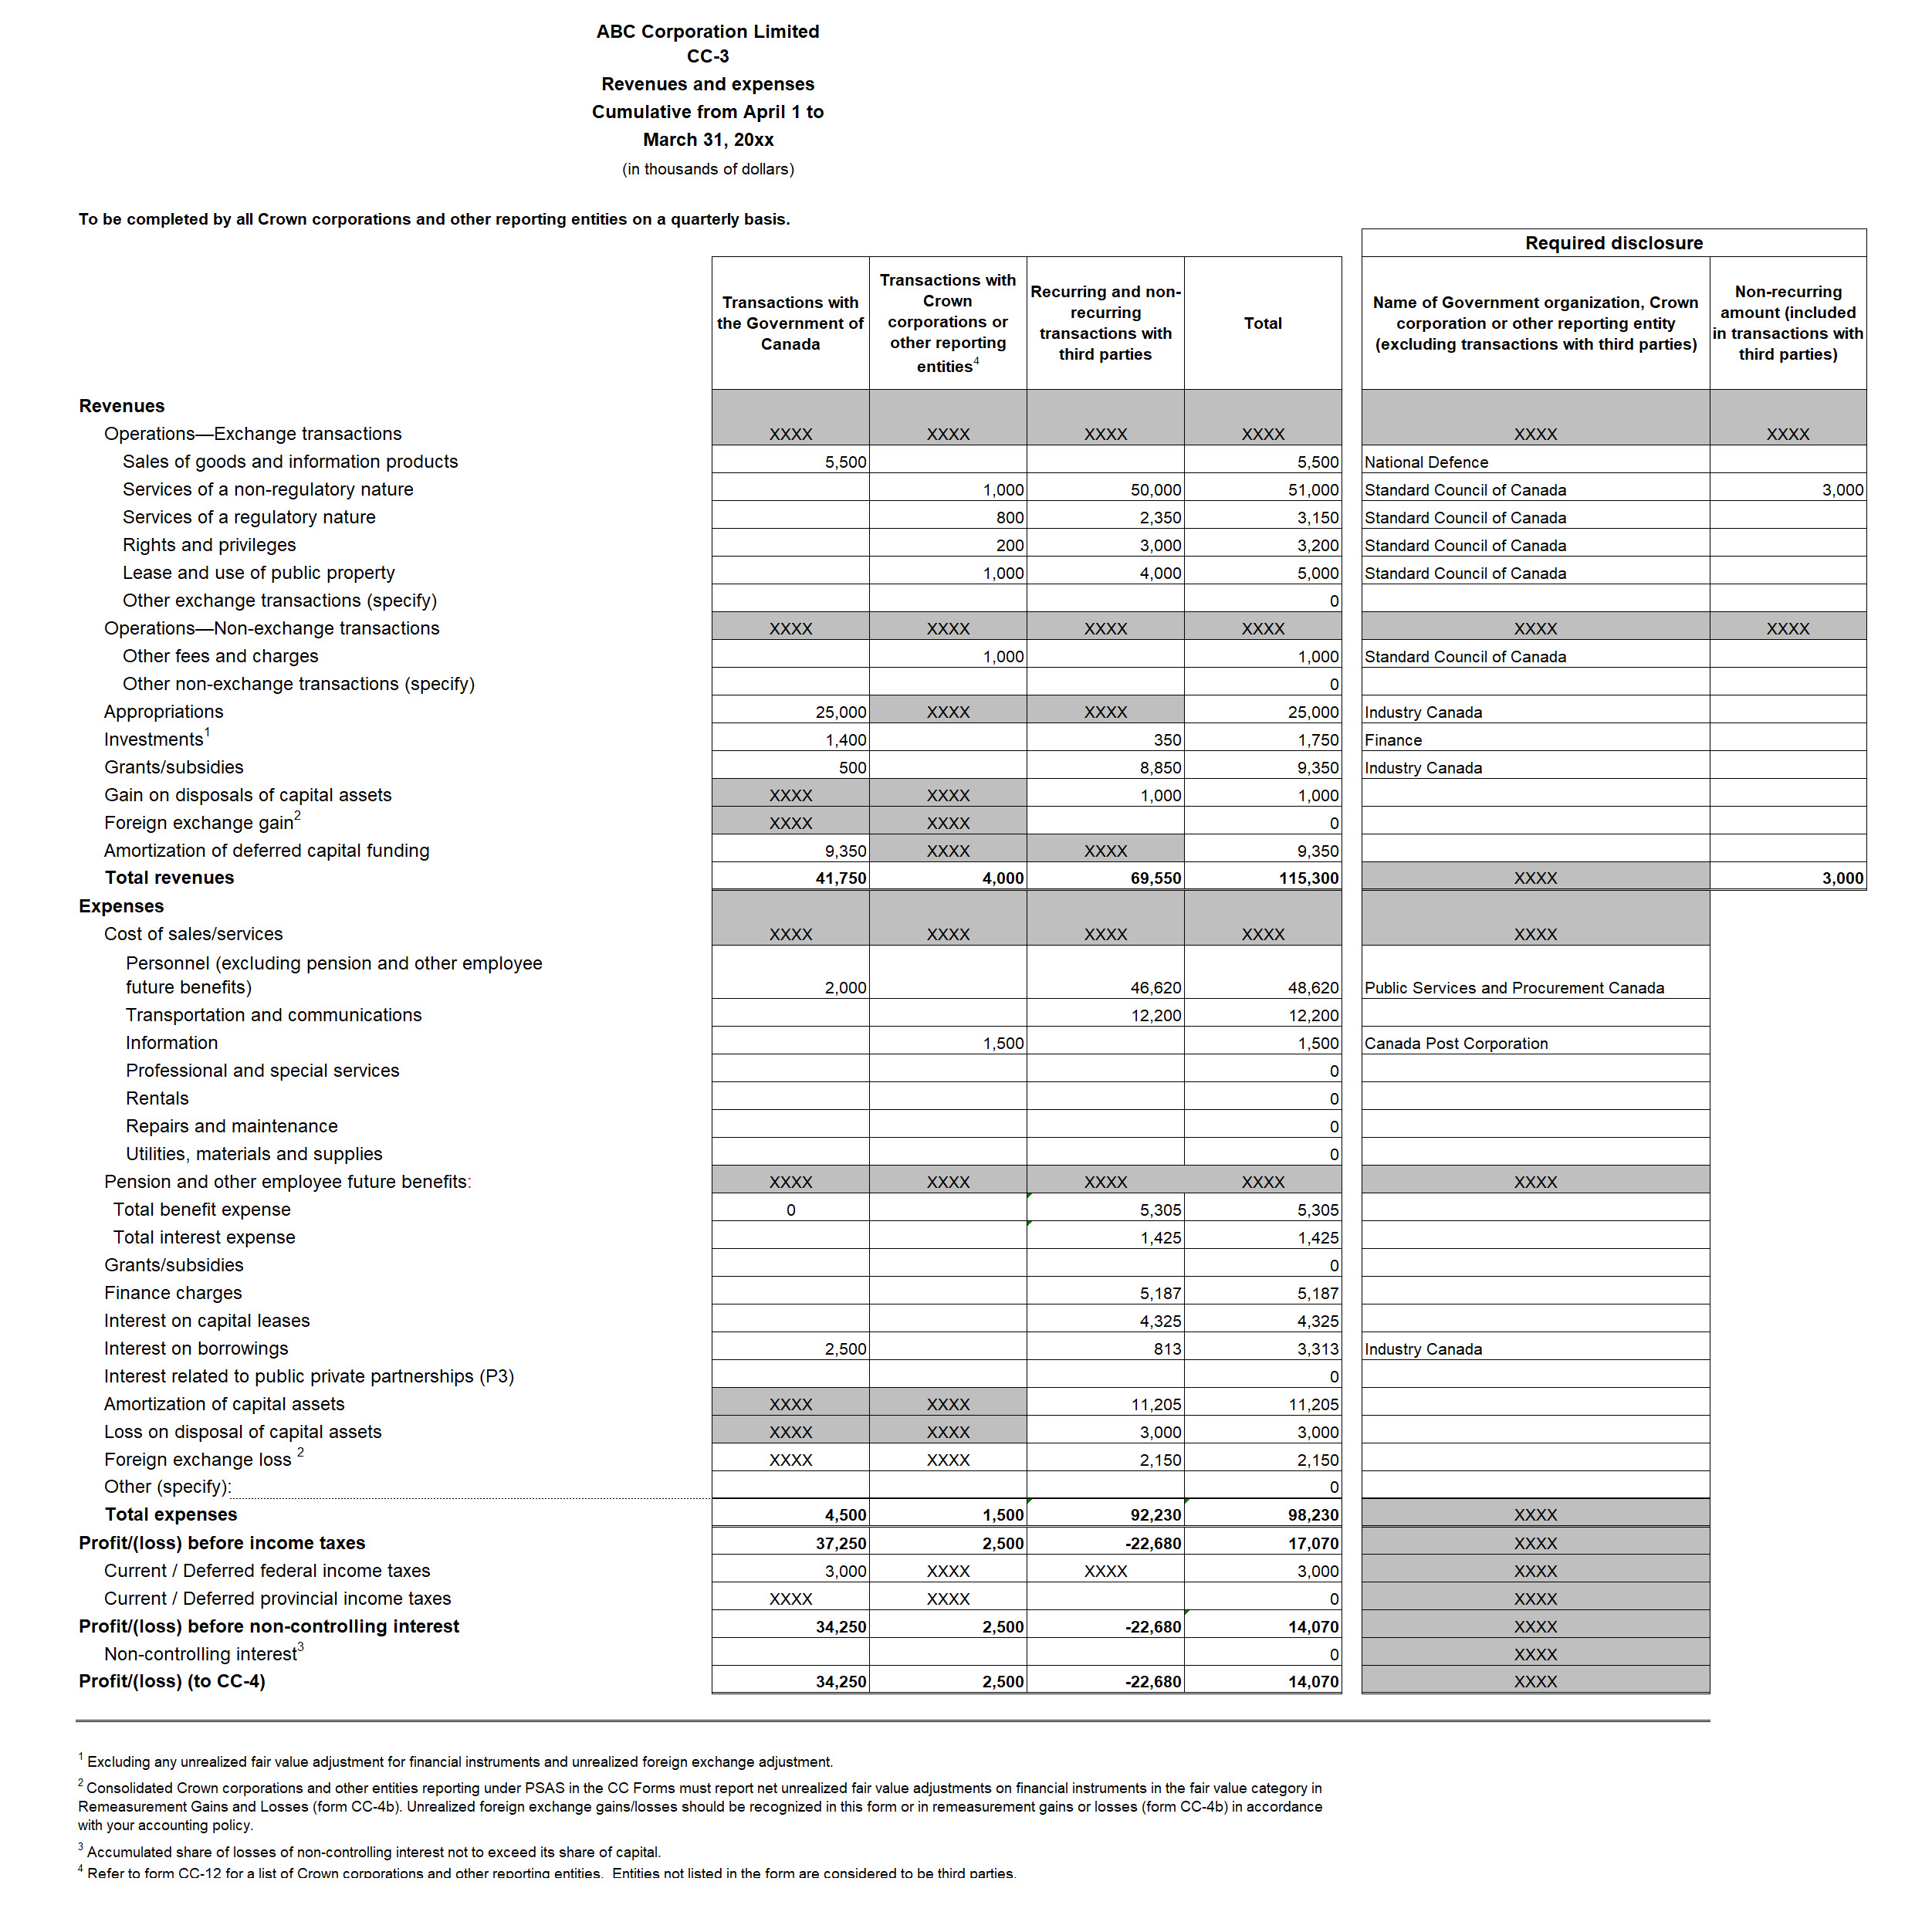 Screen capture of Form CC-3: Revenues and expenses - Text version below the image